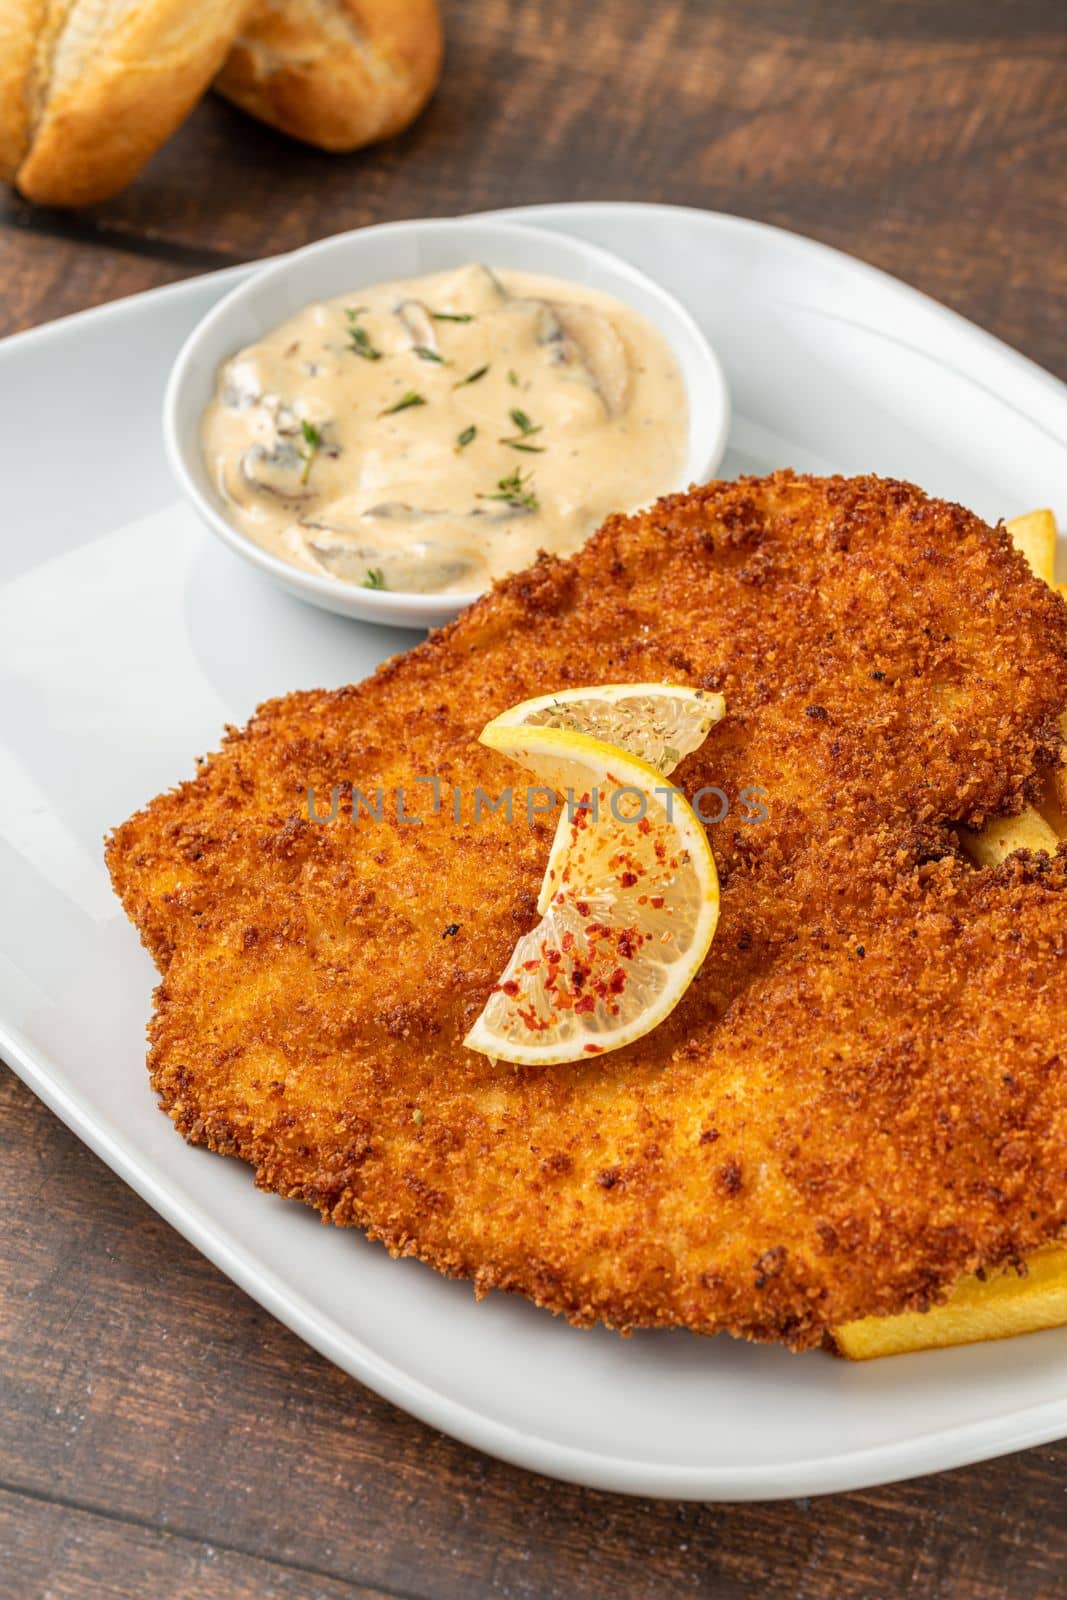 Chicken schnitzel with butter and potato salad on white porcelain plate